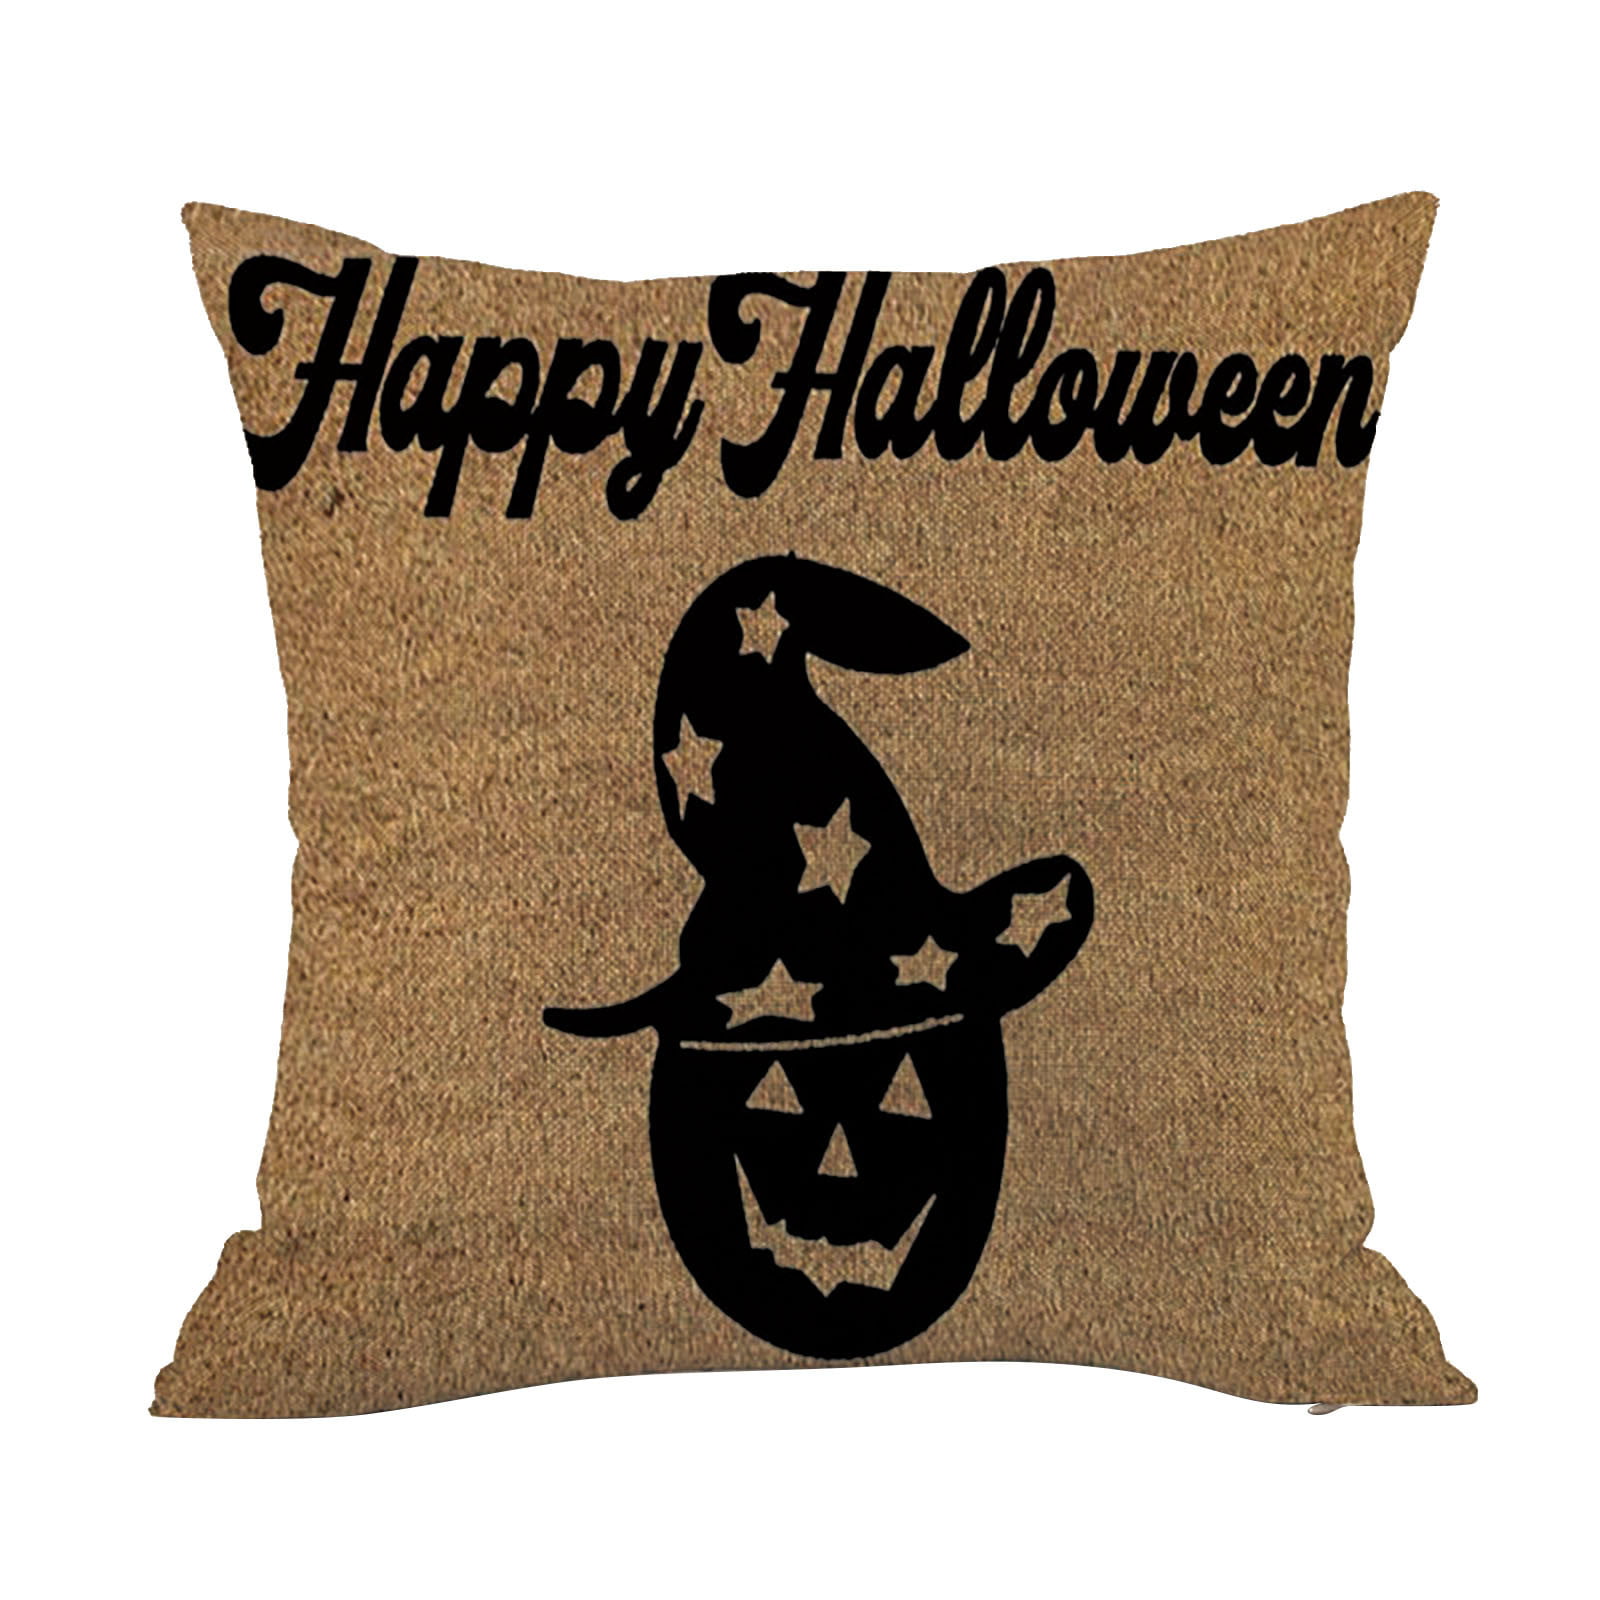 New Happy Halloween Sofa Bed Home Decoration Festival Pillow Case Cushion Cover 